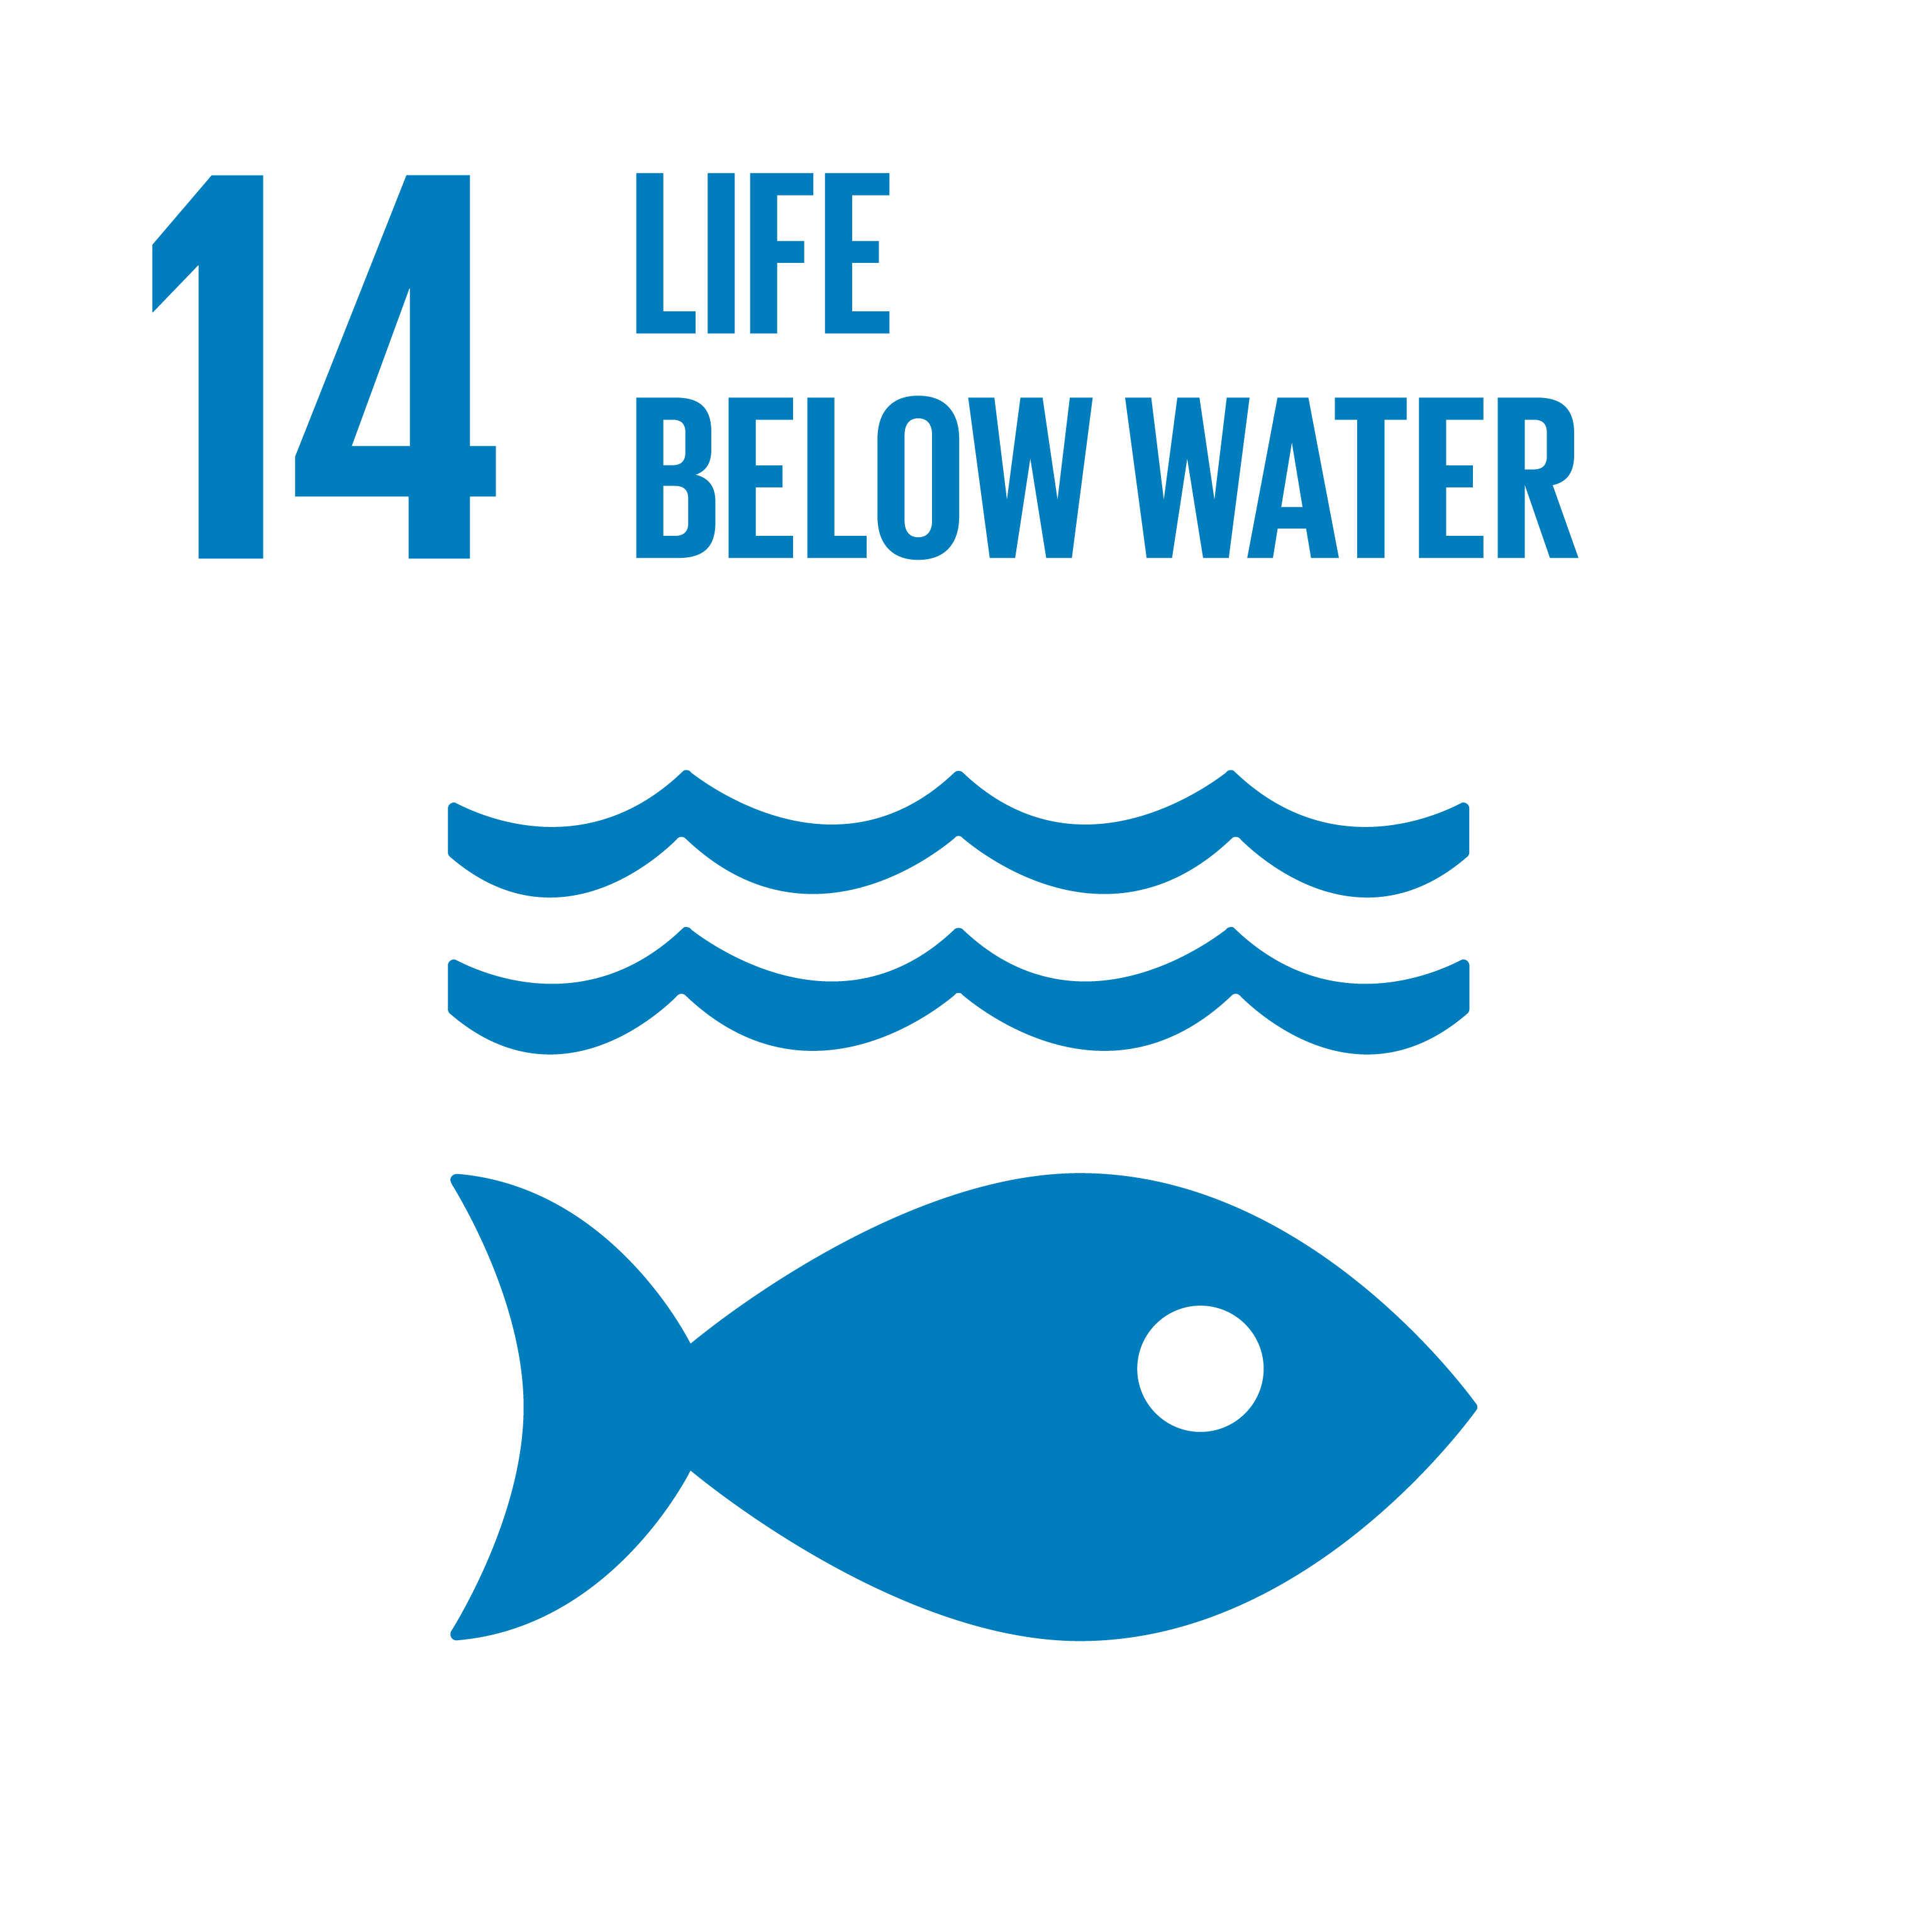 Conserve and sustainably use the oceans, seas and marine resources for sustainable development